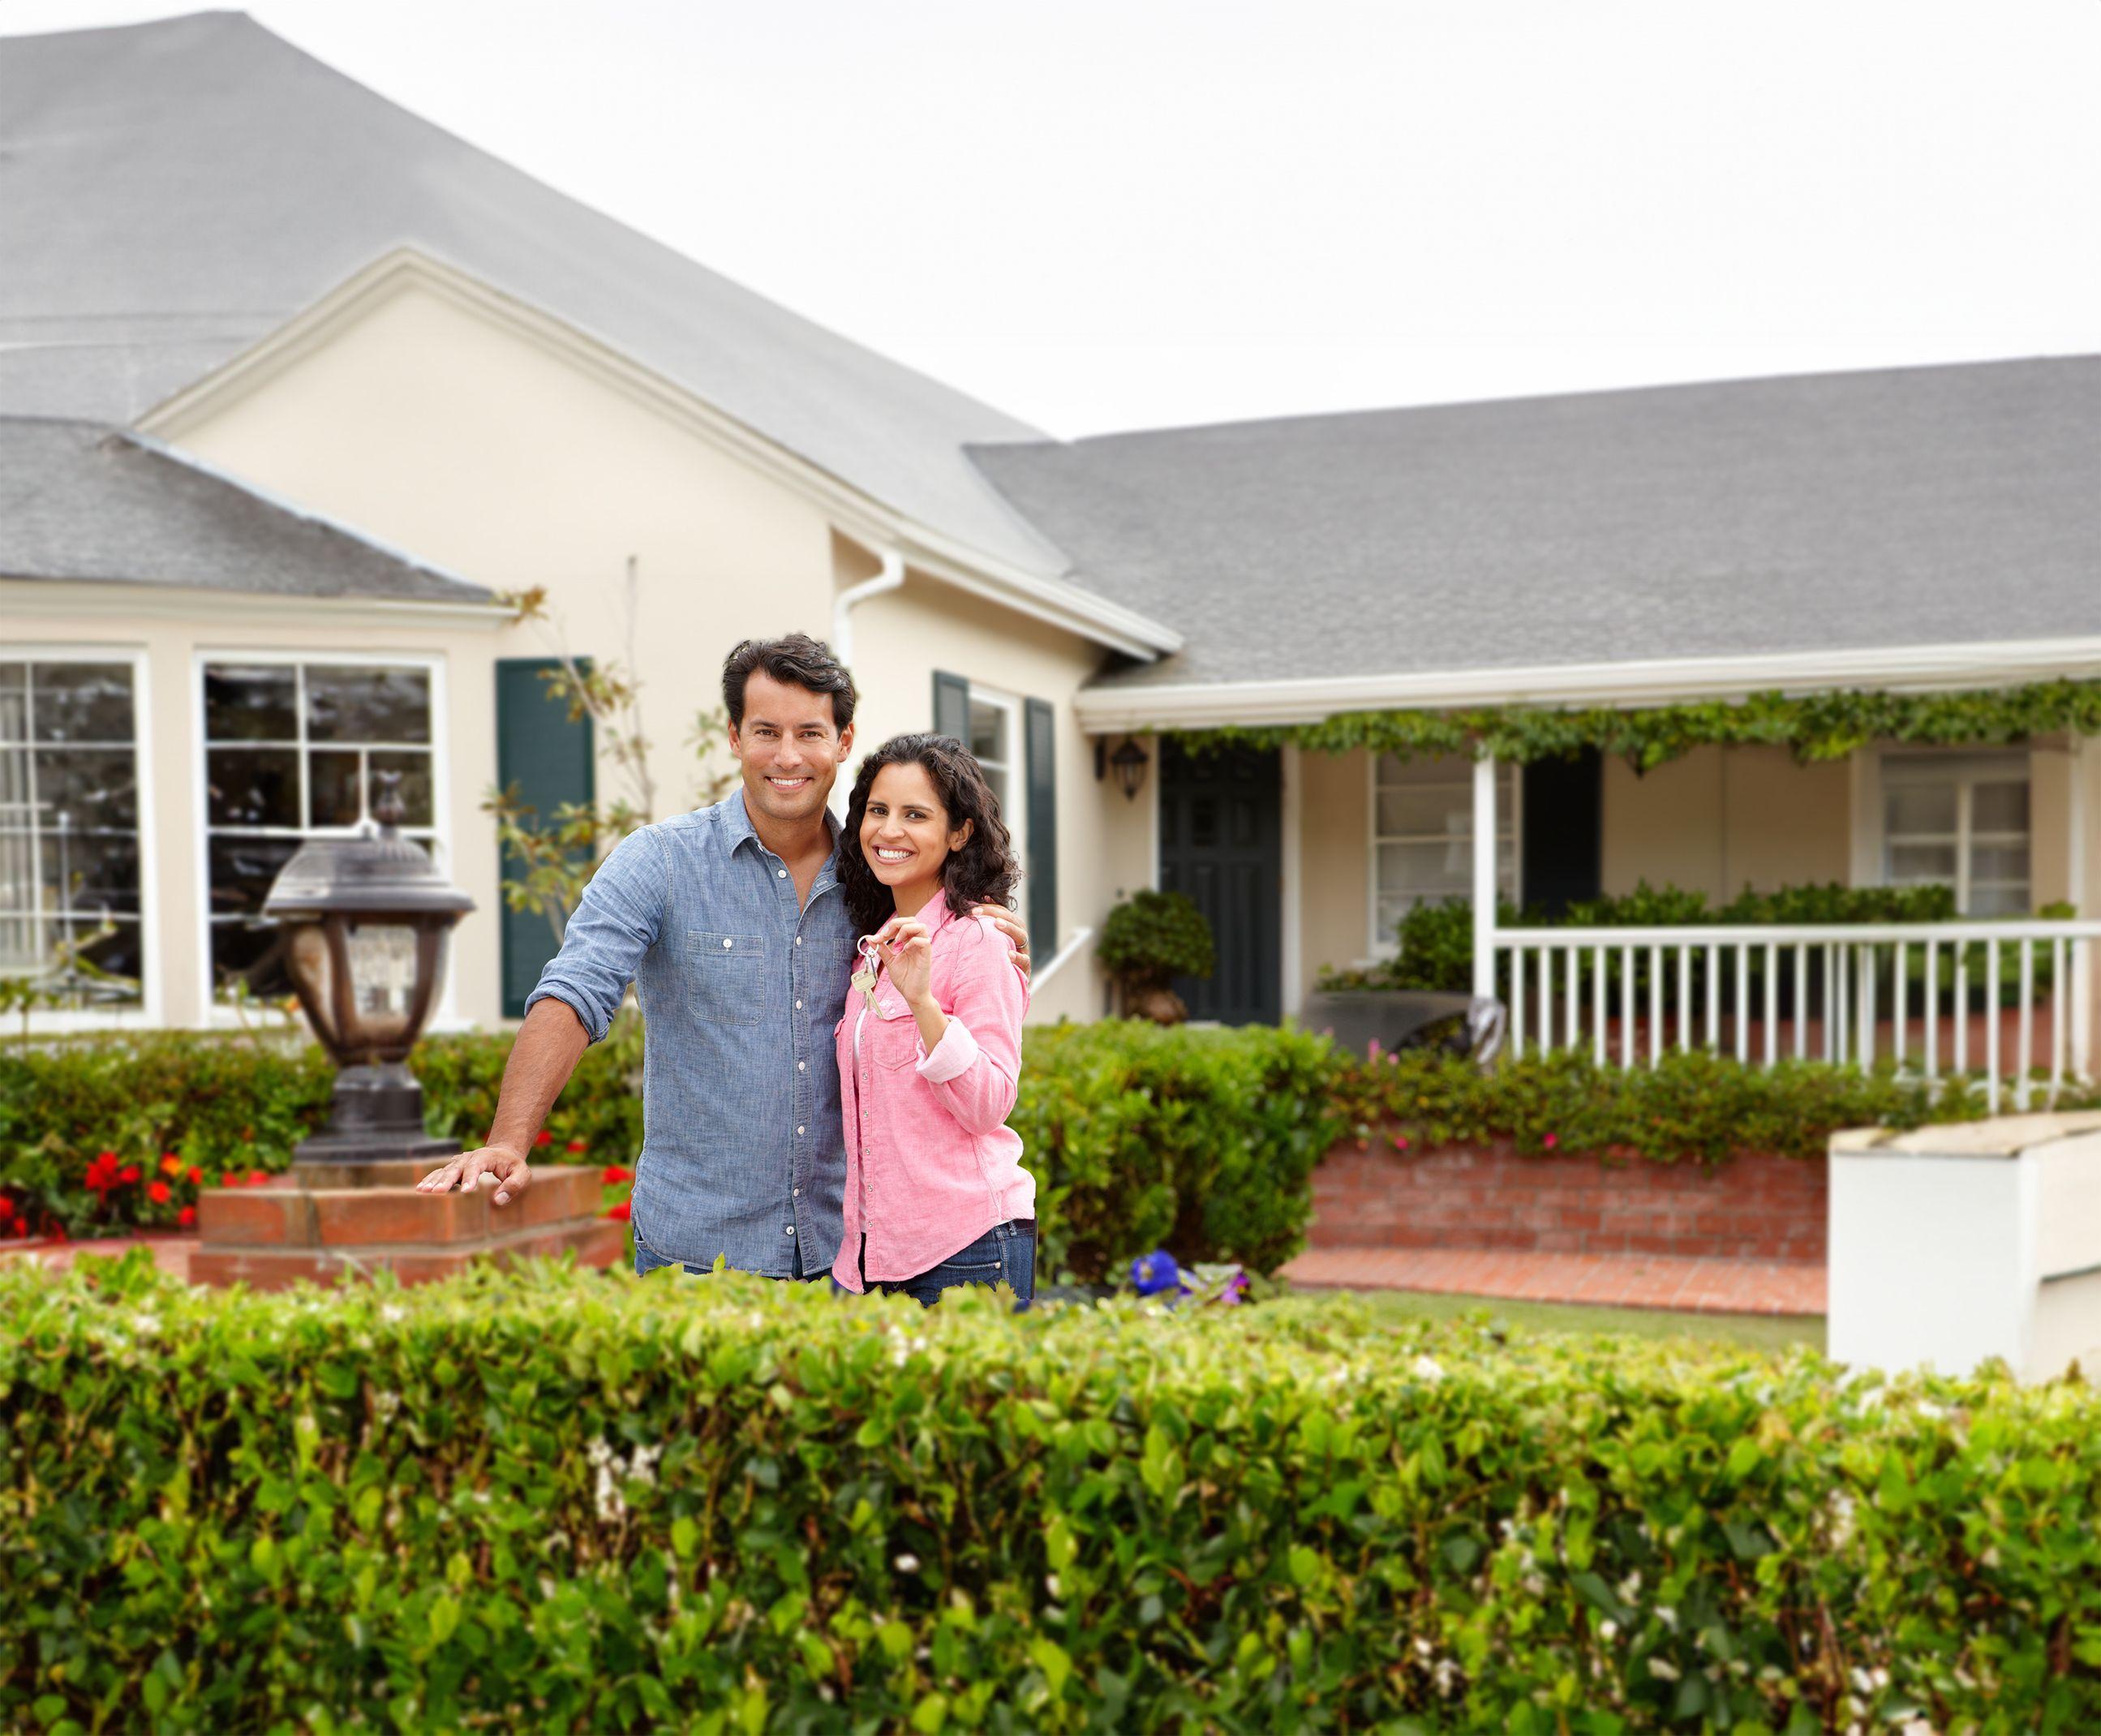 Home buying couple in front of a house.